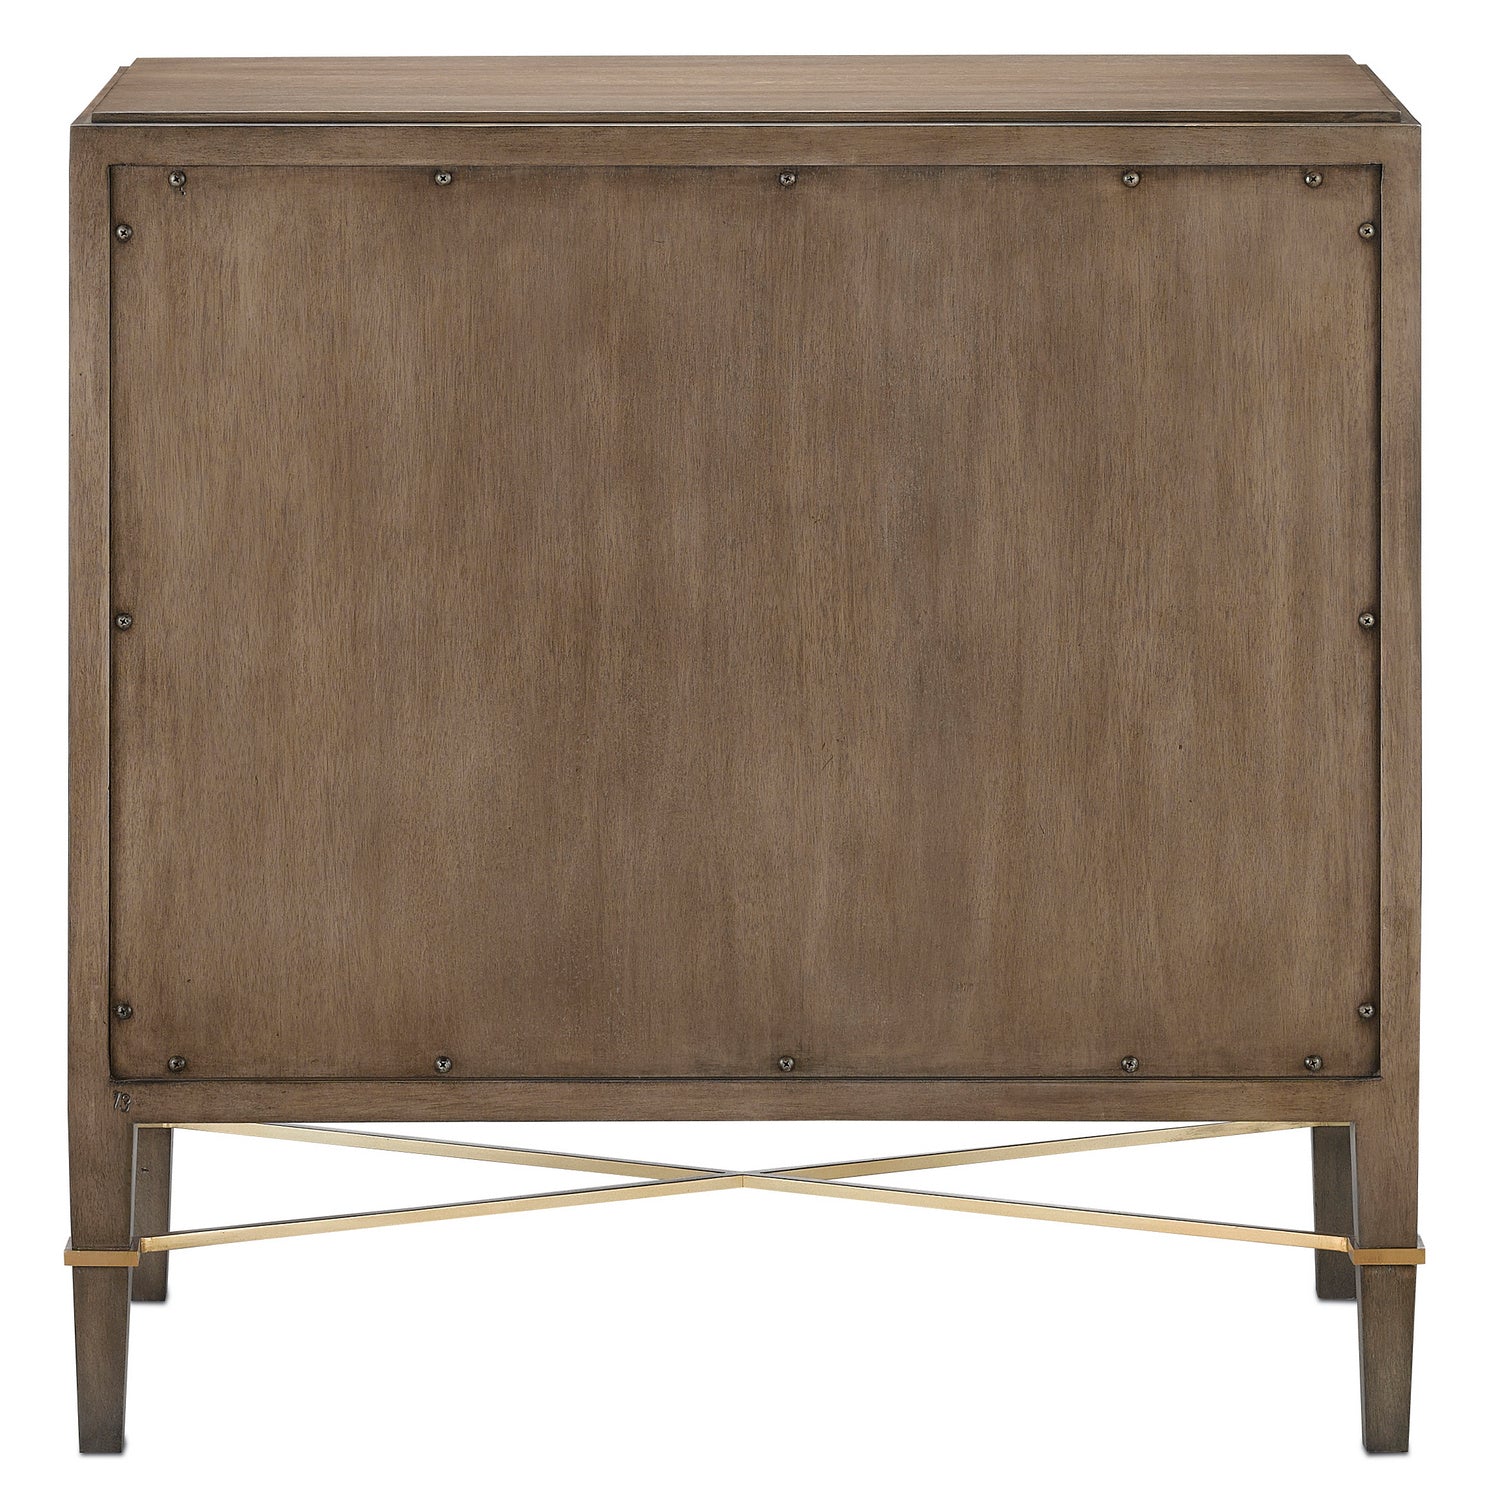 Chest from the Verona collection in Chanterelle/Coffee/Champagne finish